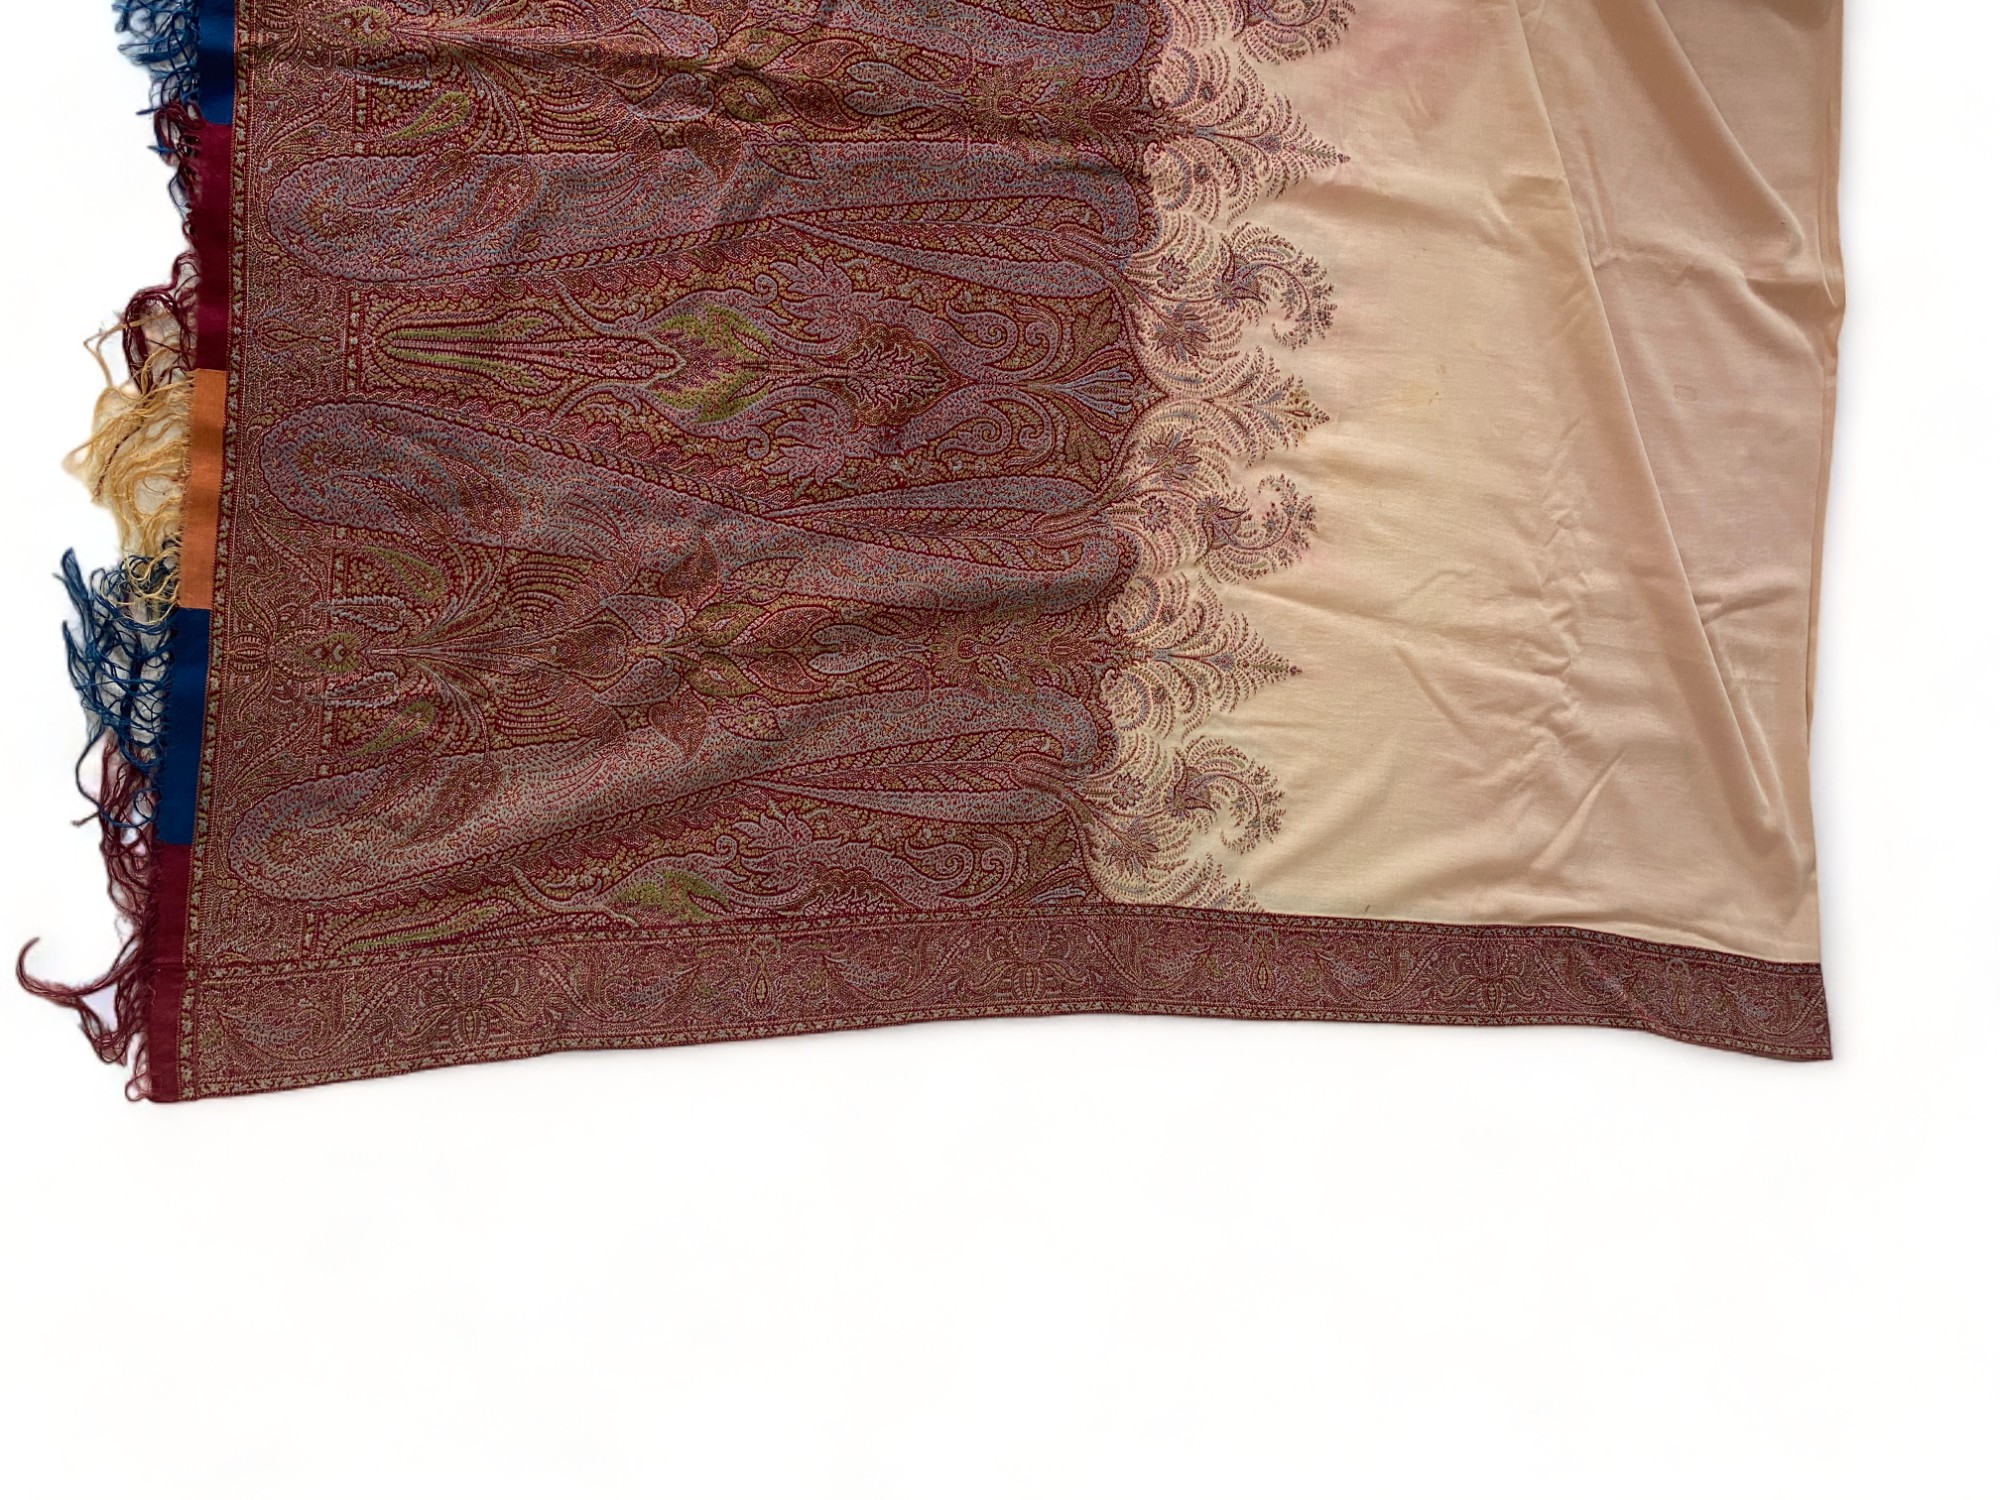 A 19th century red, brown and blue paisley cotton shawl together with another shawl - Image 11 of 13